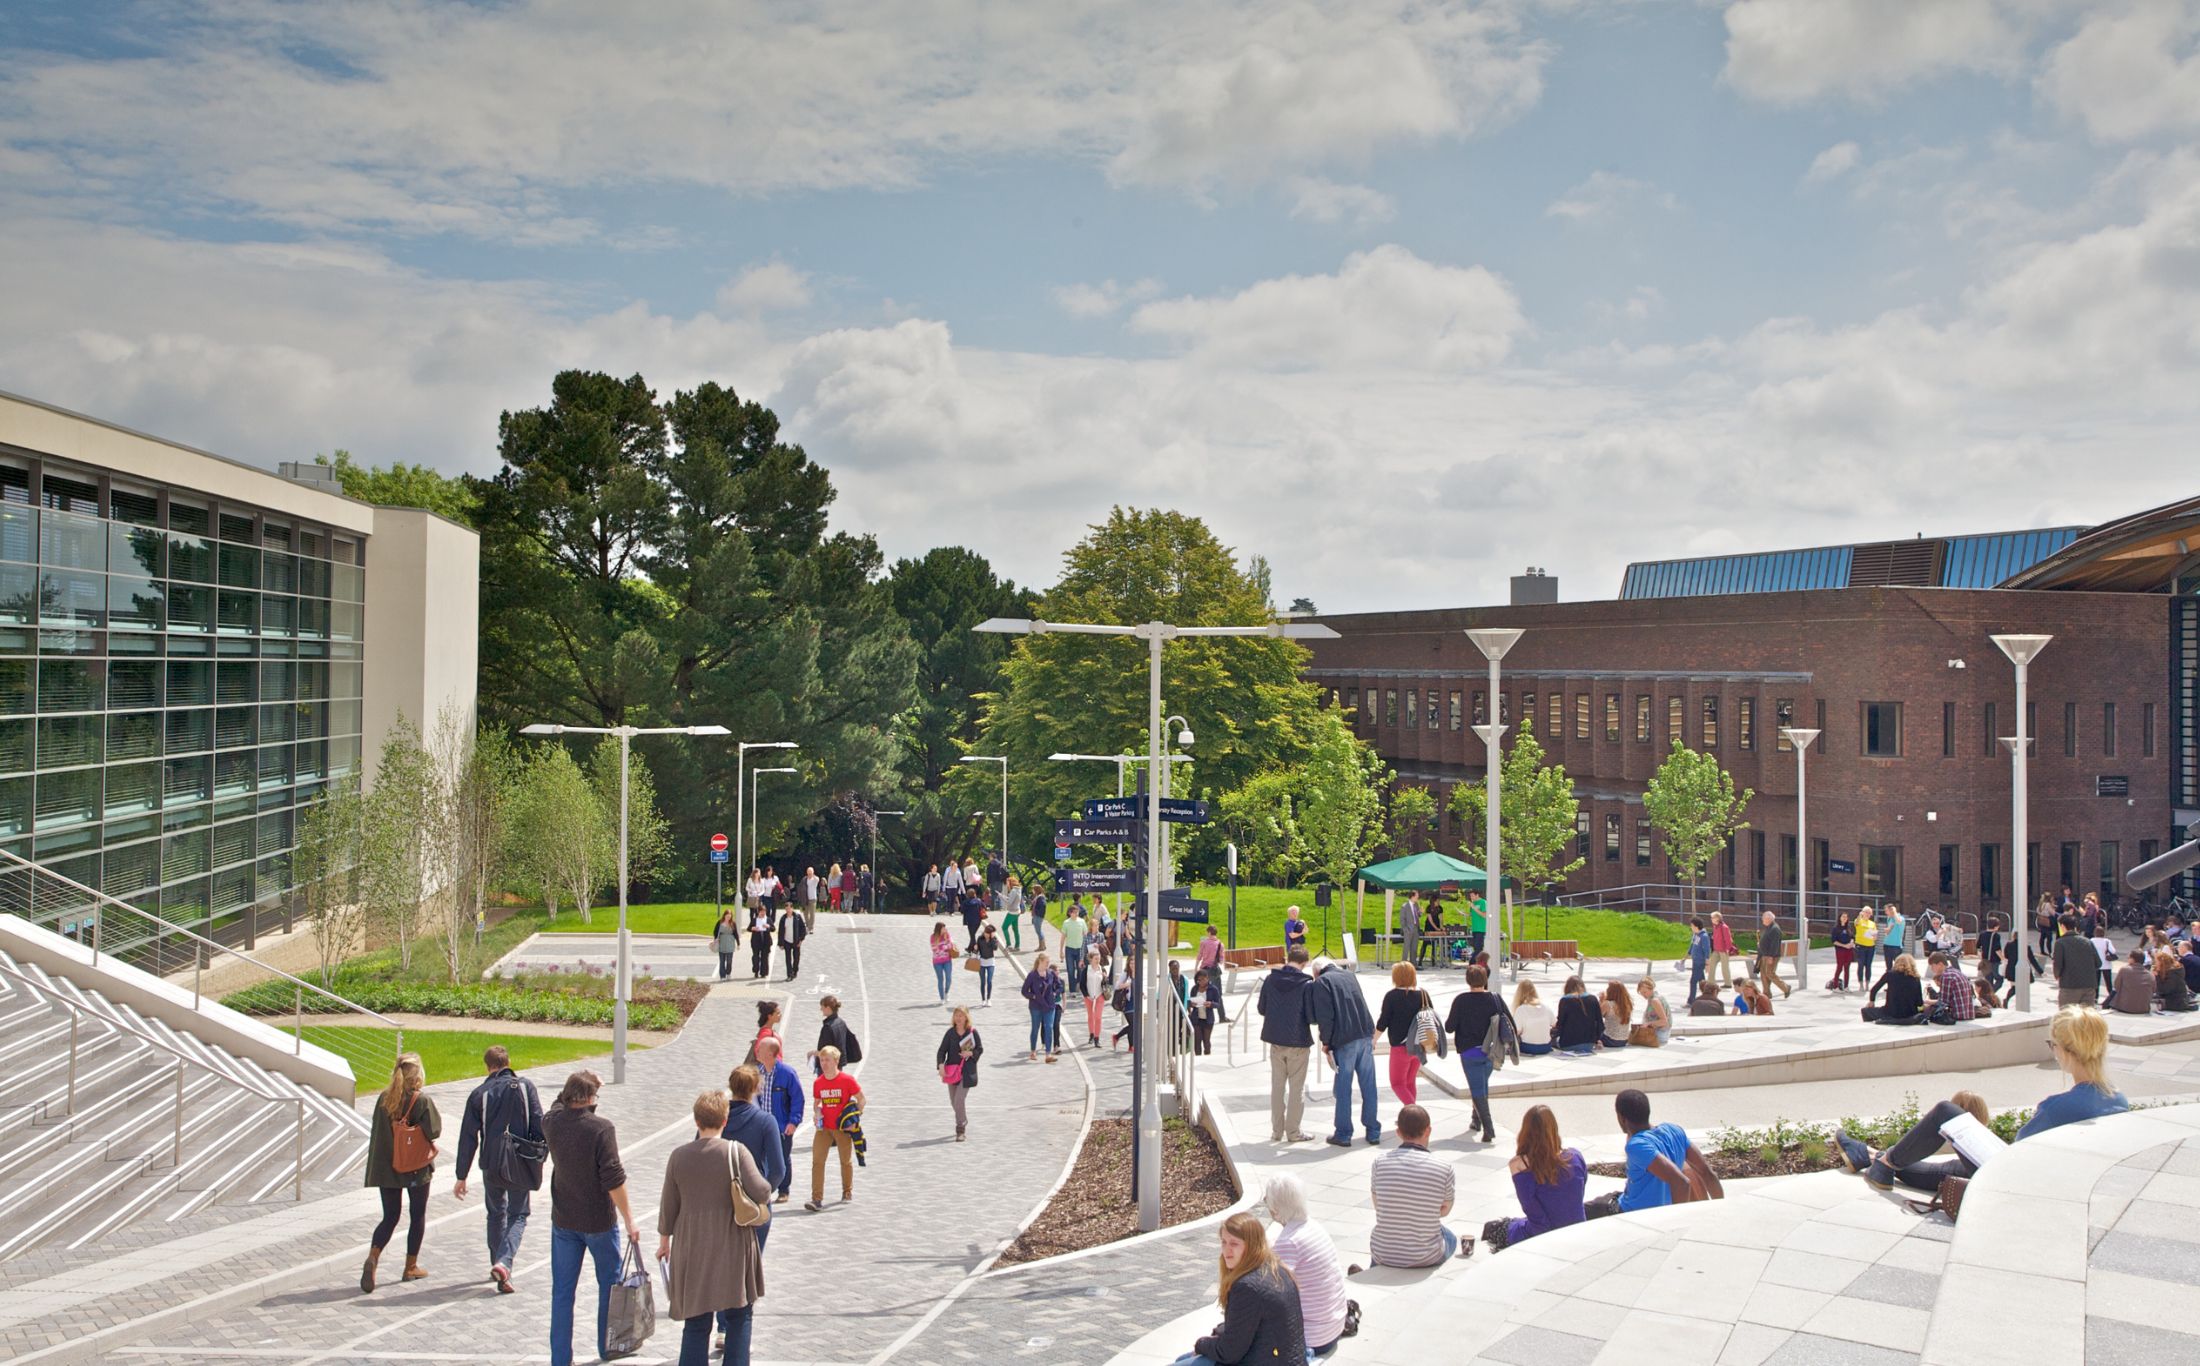 Introducing The University of Exeter: World-Class Education in the UK